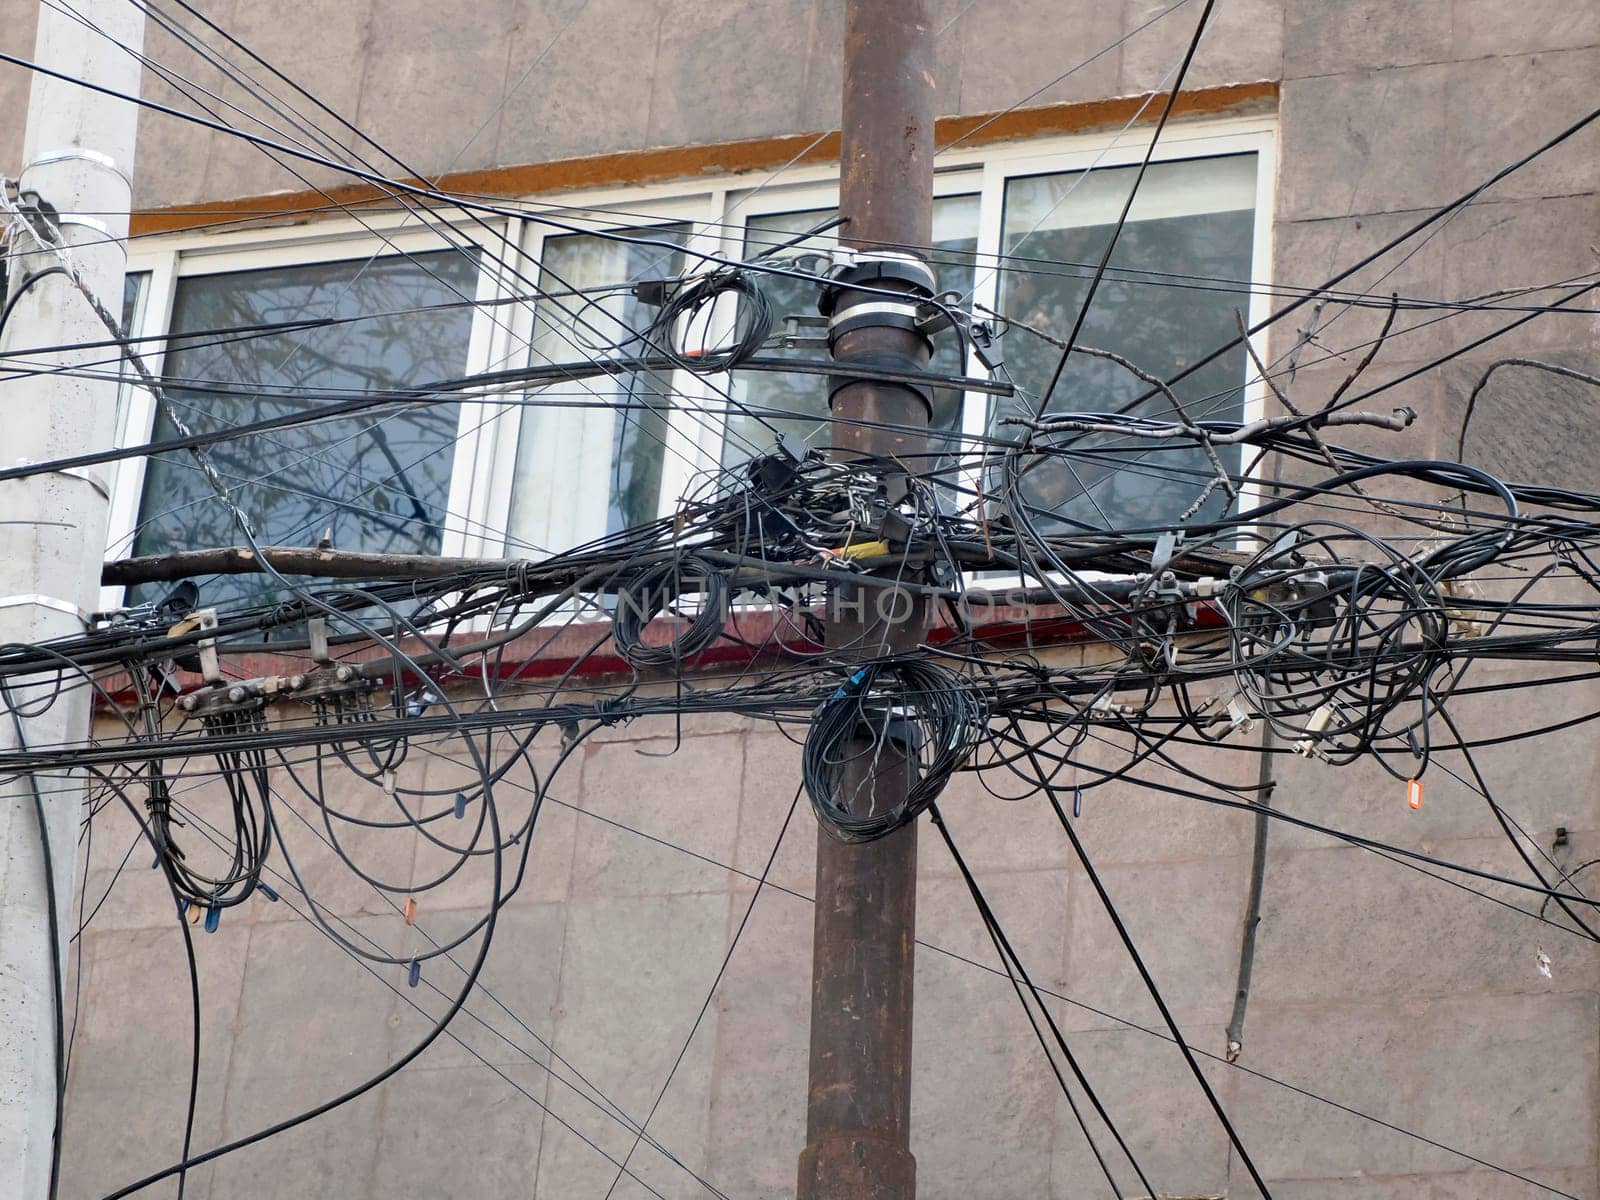 Mexico City Messed up power lines and connection cables. Many tangled wires on electric poles in the city by AndreaIzzotti